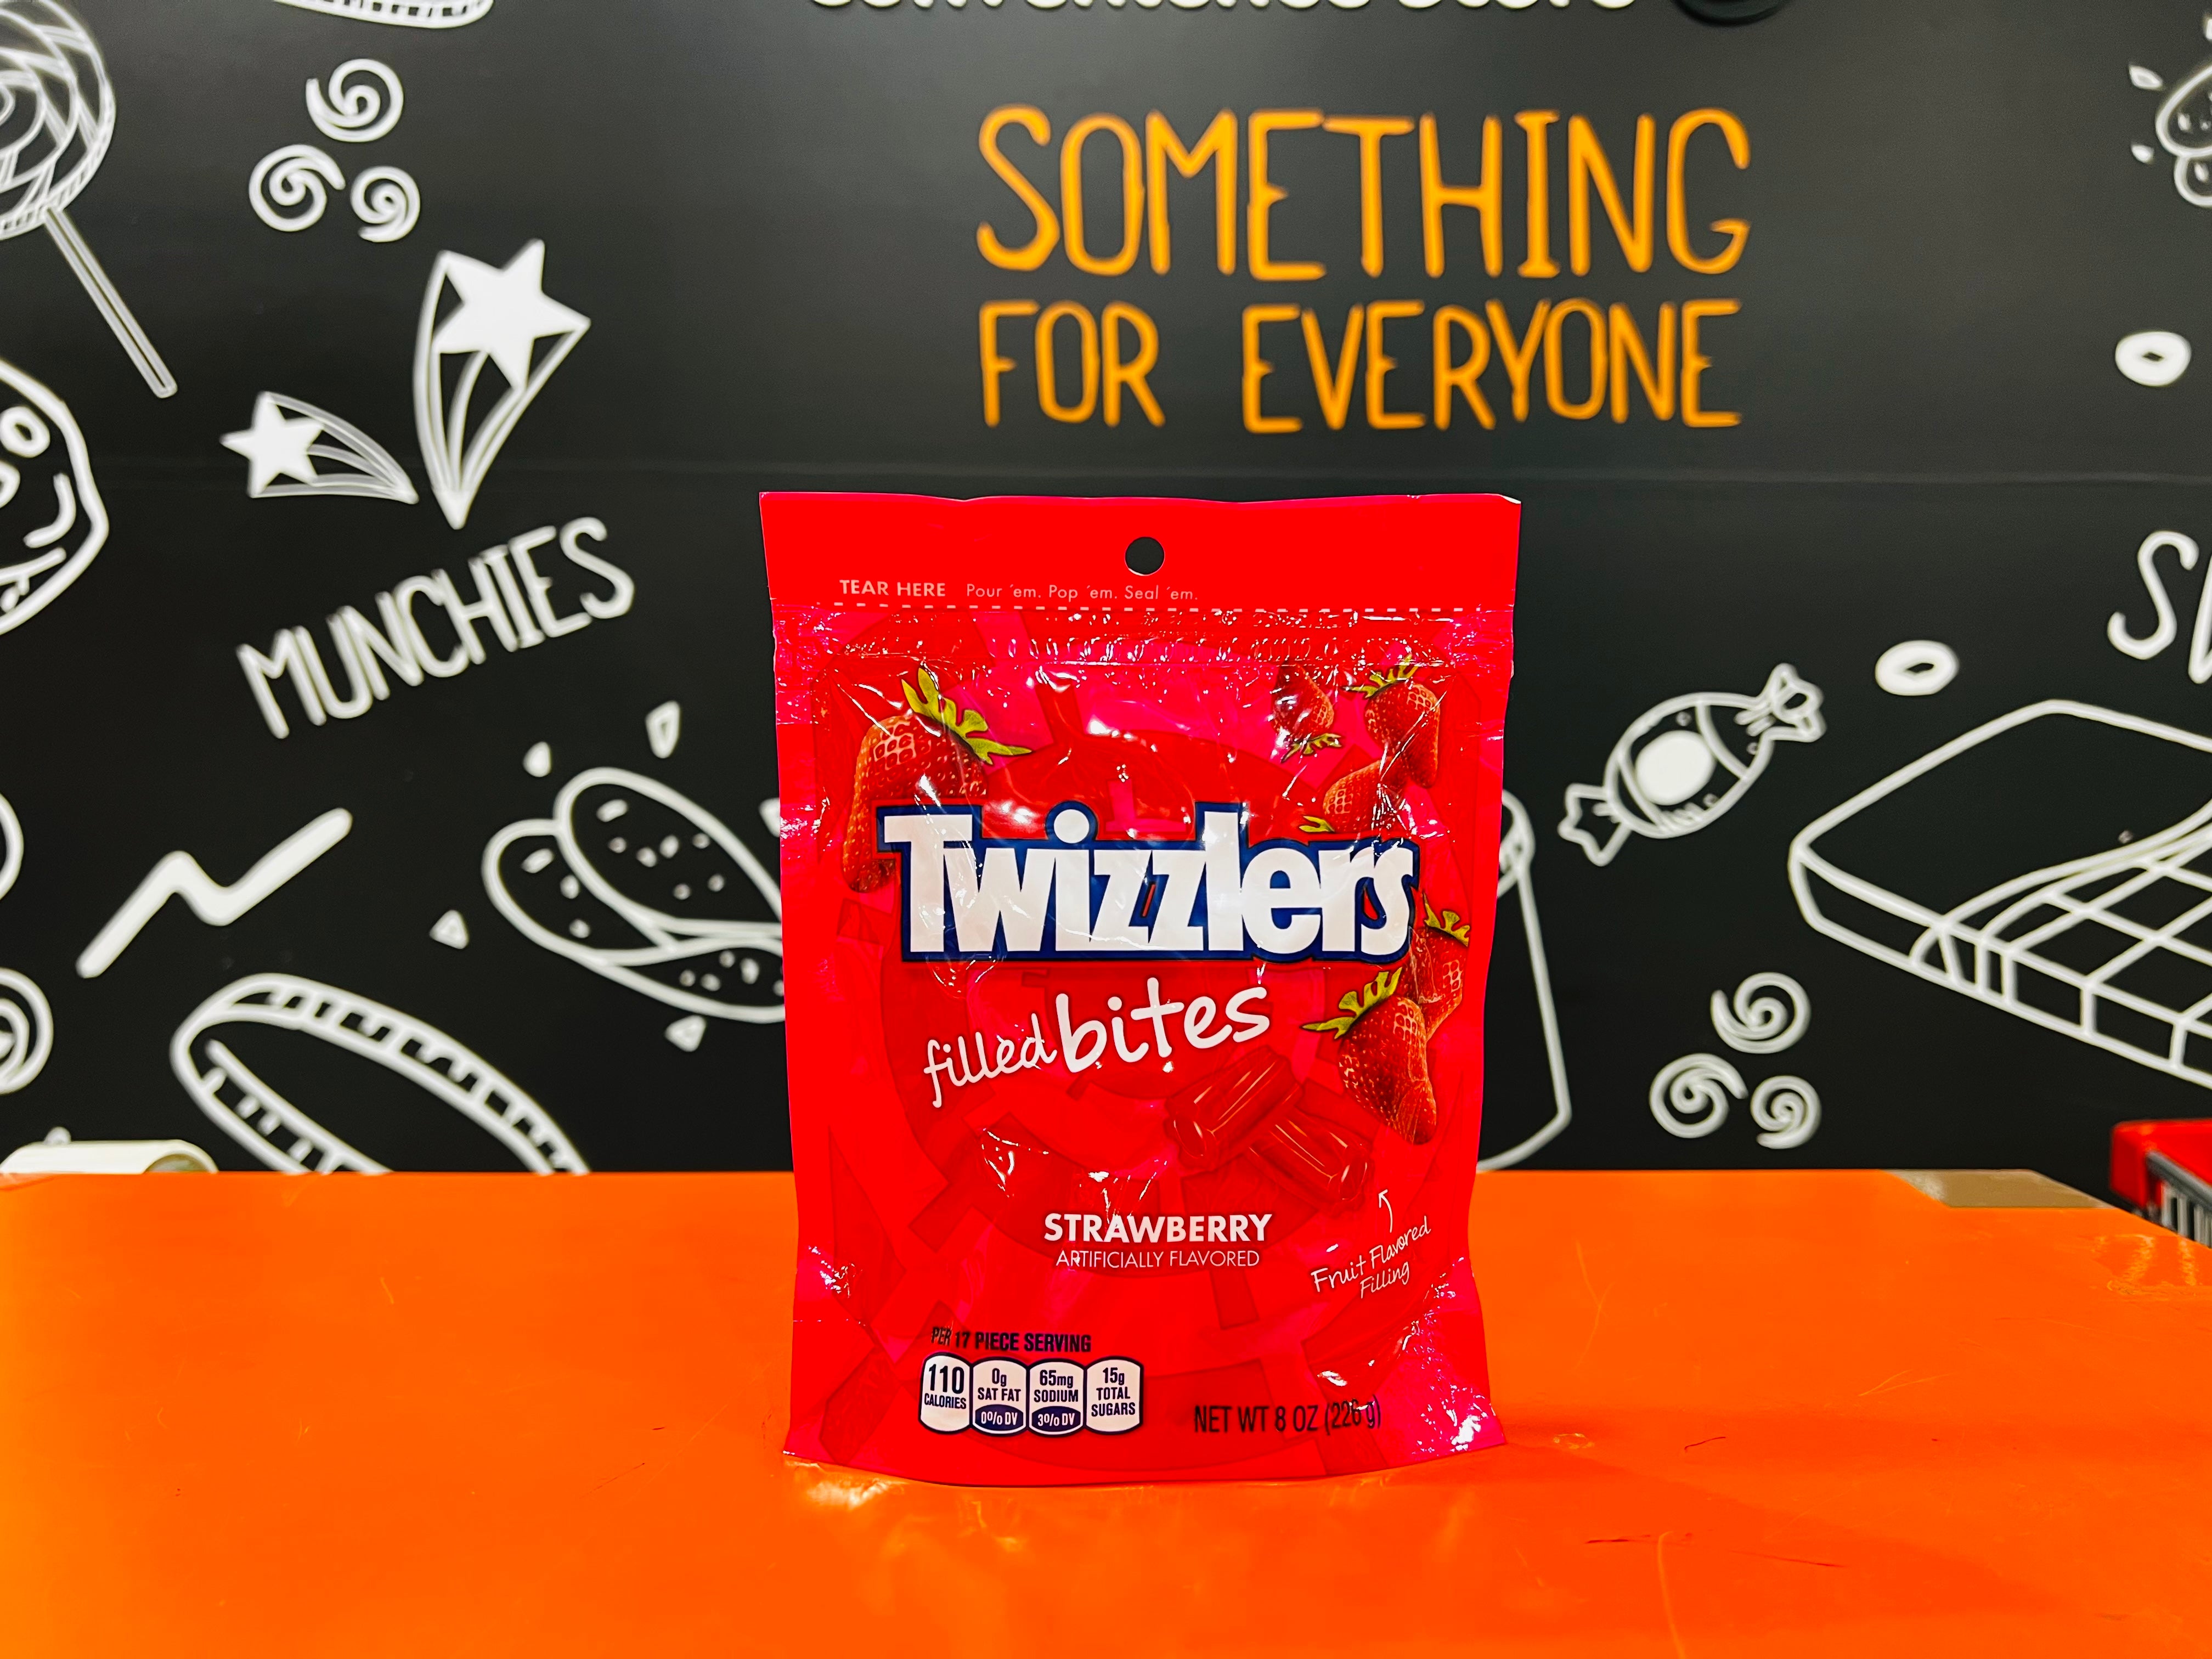 Twizzlers Filled bites Strawberry 226g